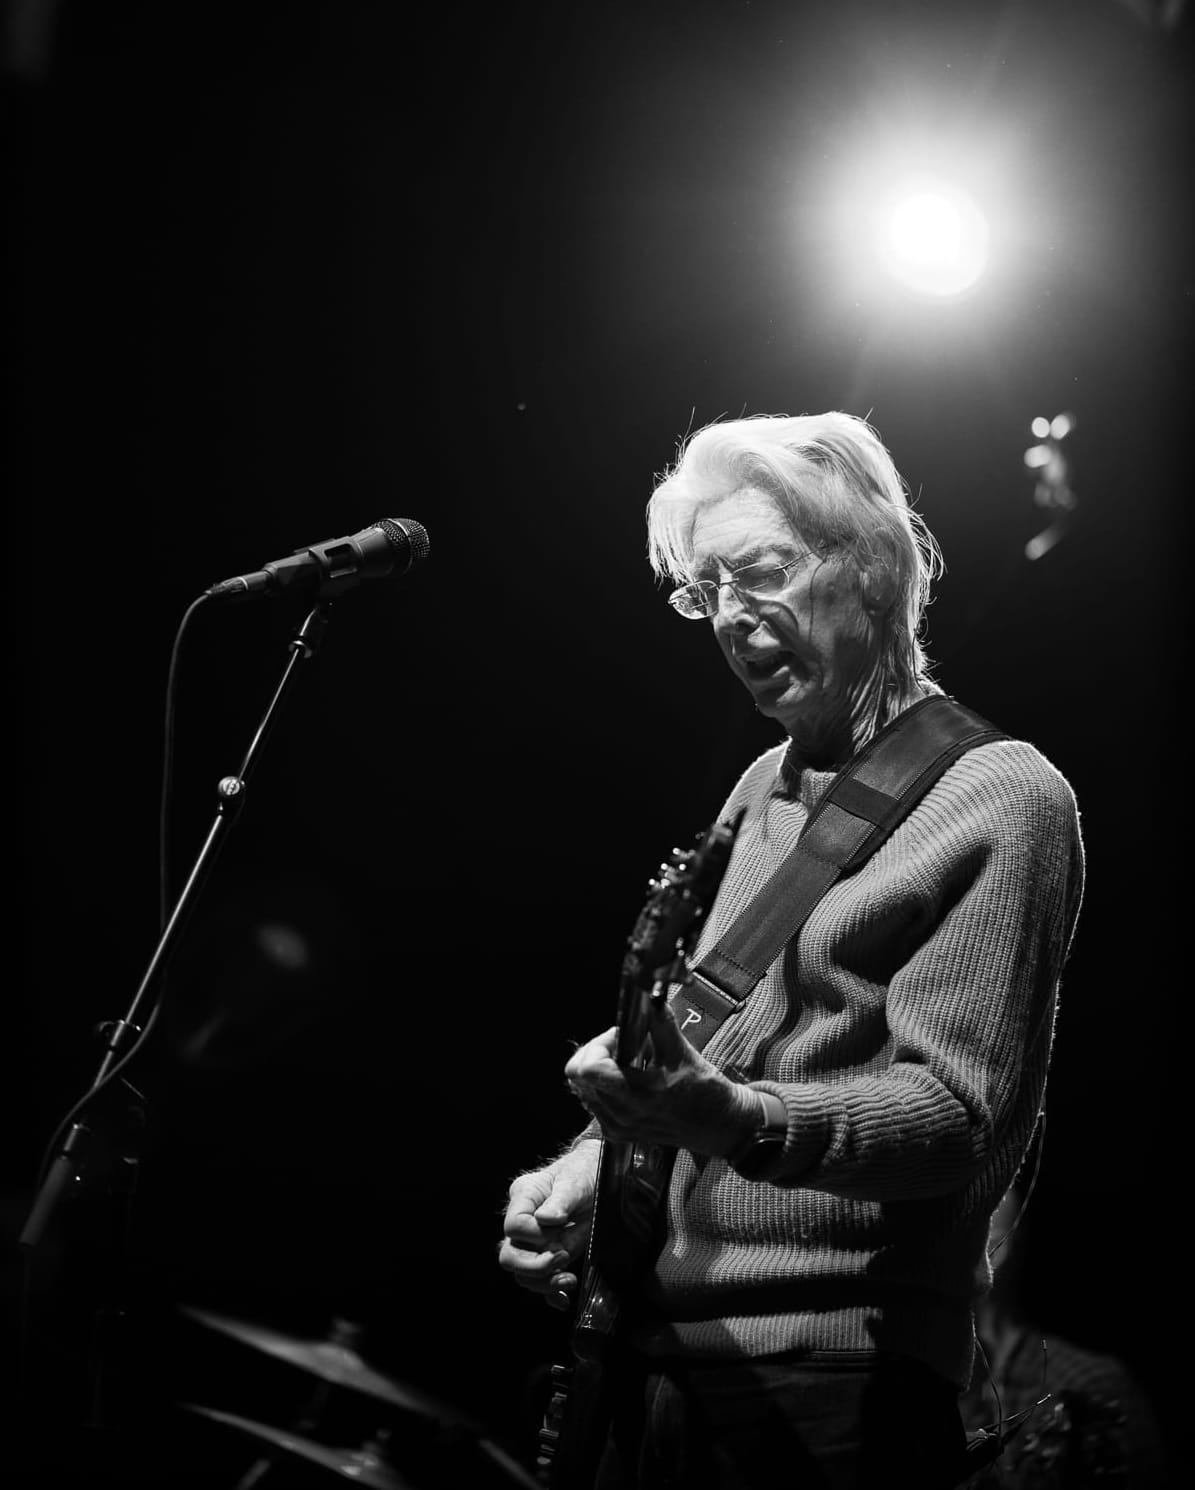 Band Practice: Phil Lesh Invites Viewers Behind-the-Scenes Ahead of Warfield Concert in San Francisco